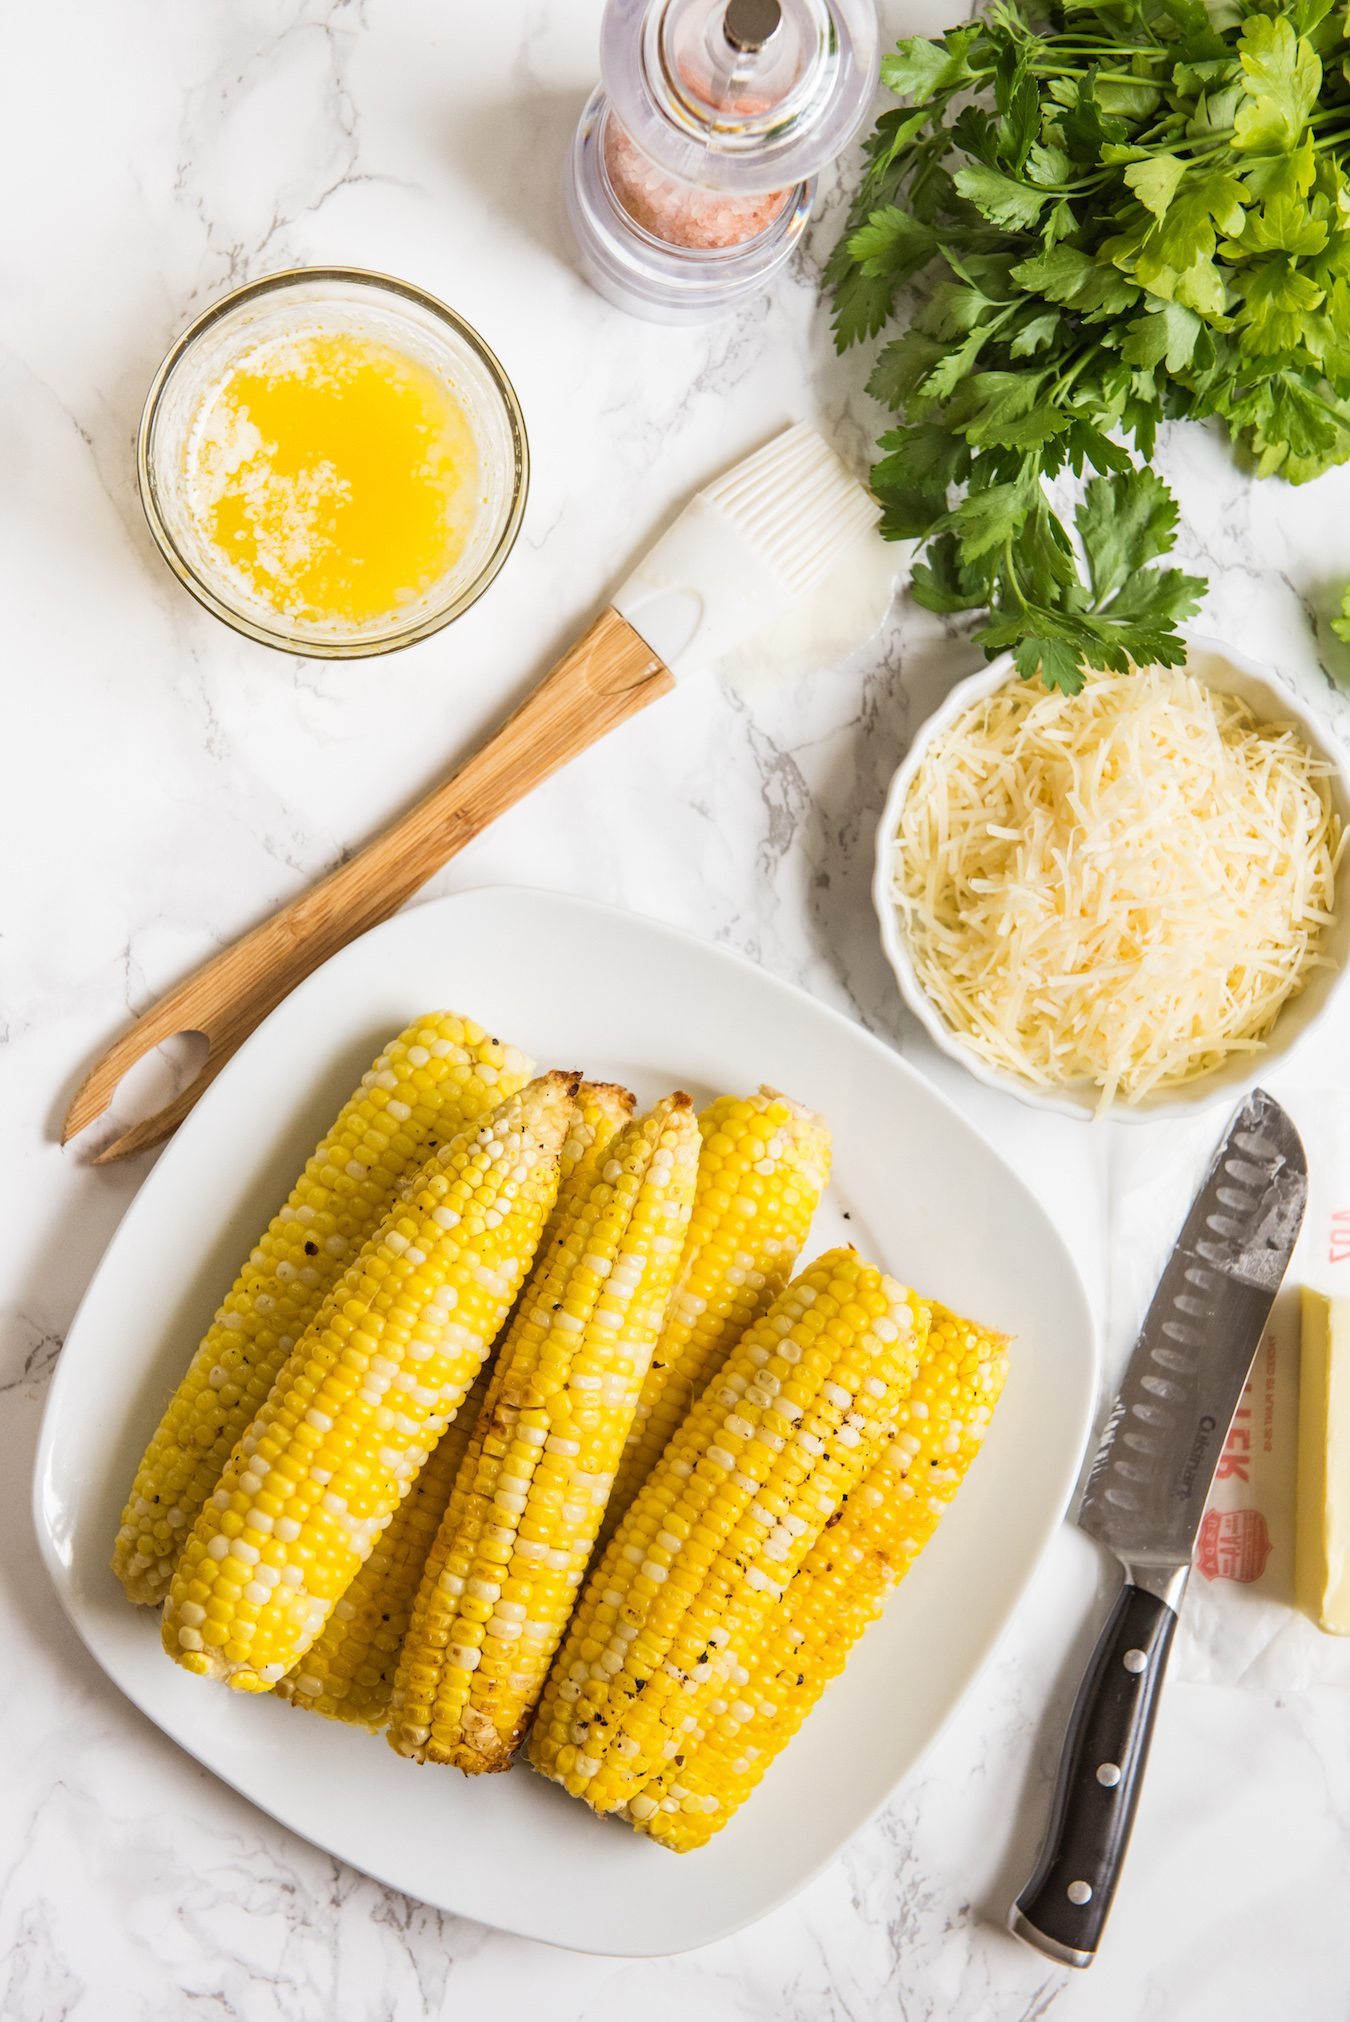 Garlic Parmesan Grilled Corn Recipe | Party recipes, entertaining tips, party ideas and more from @cydconverse